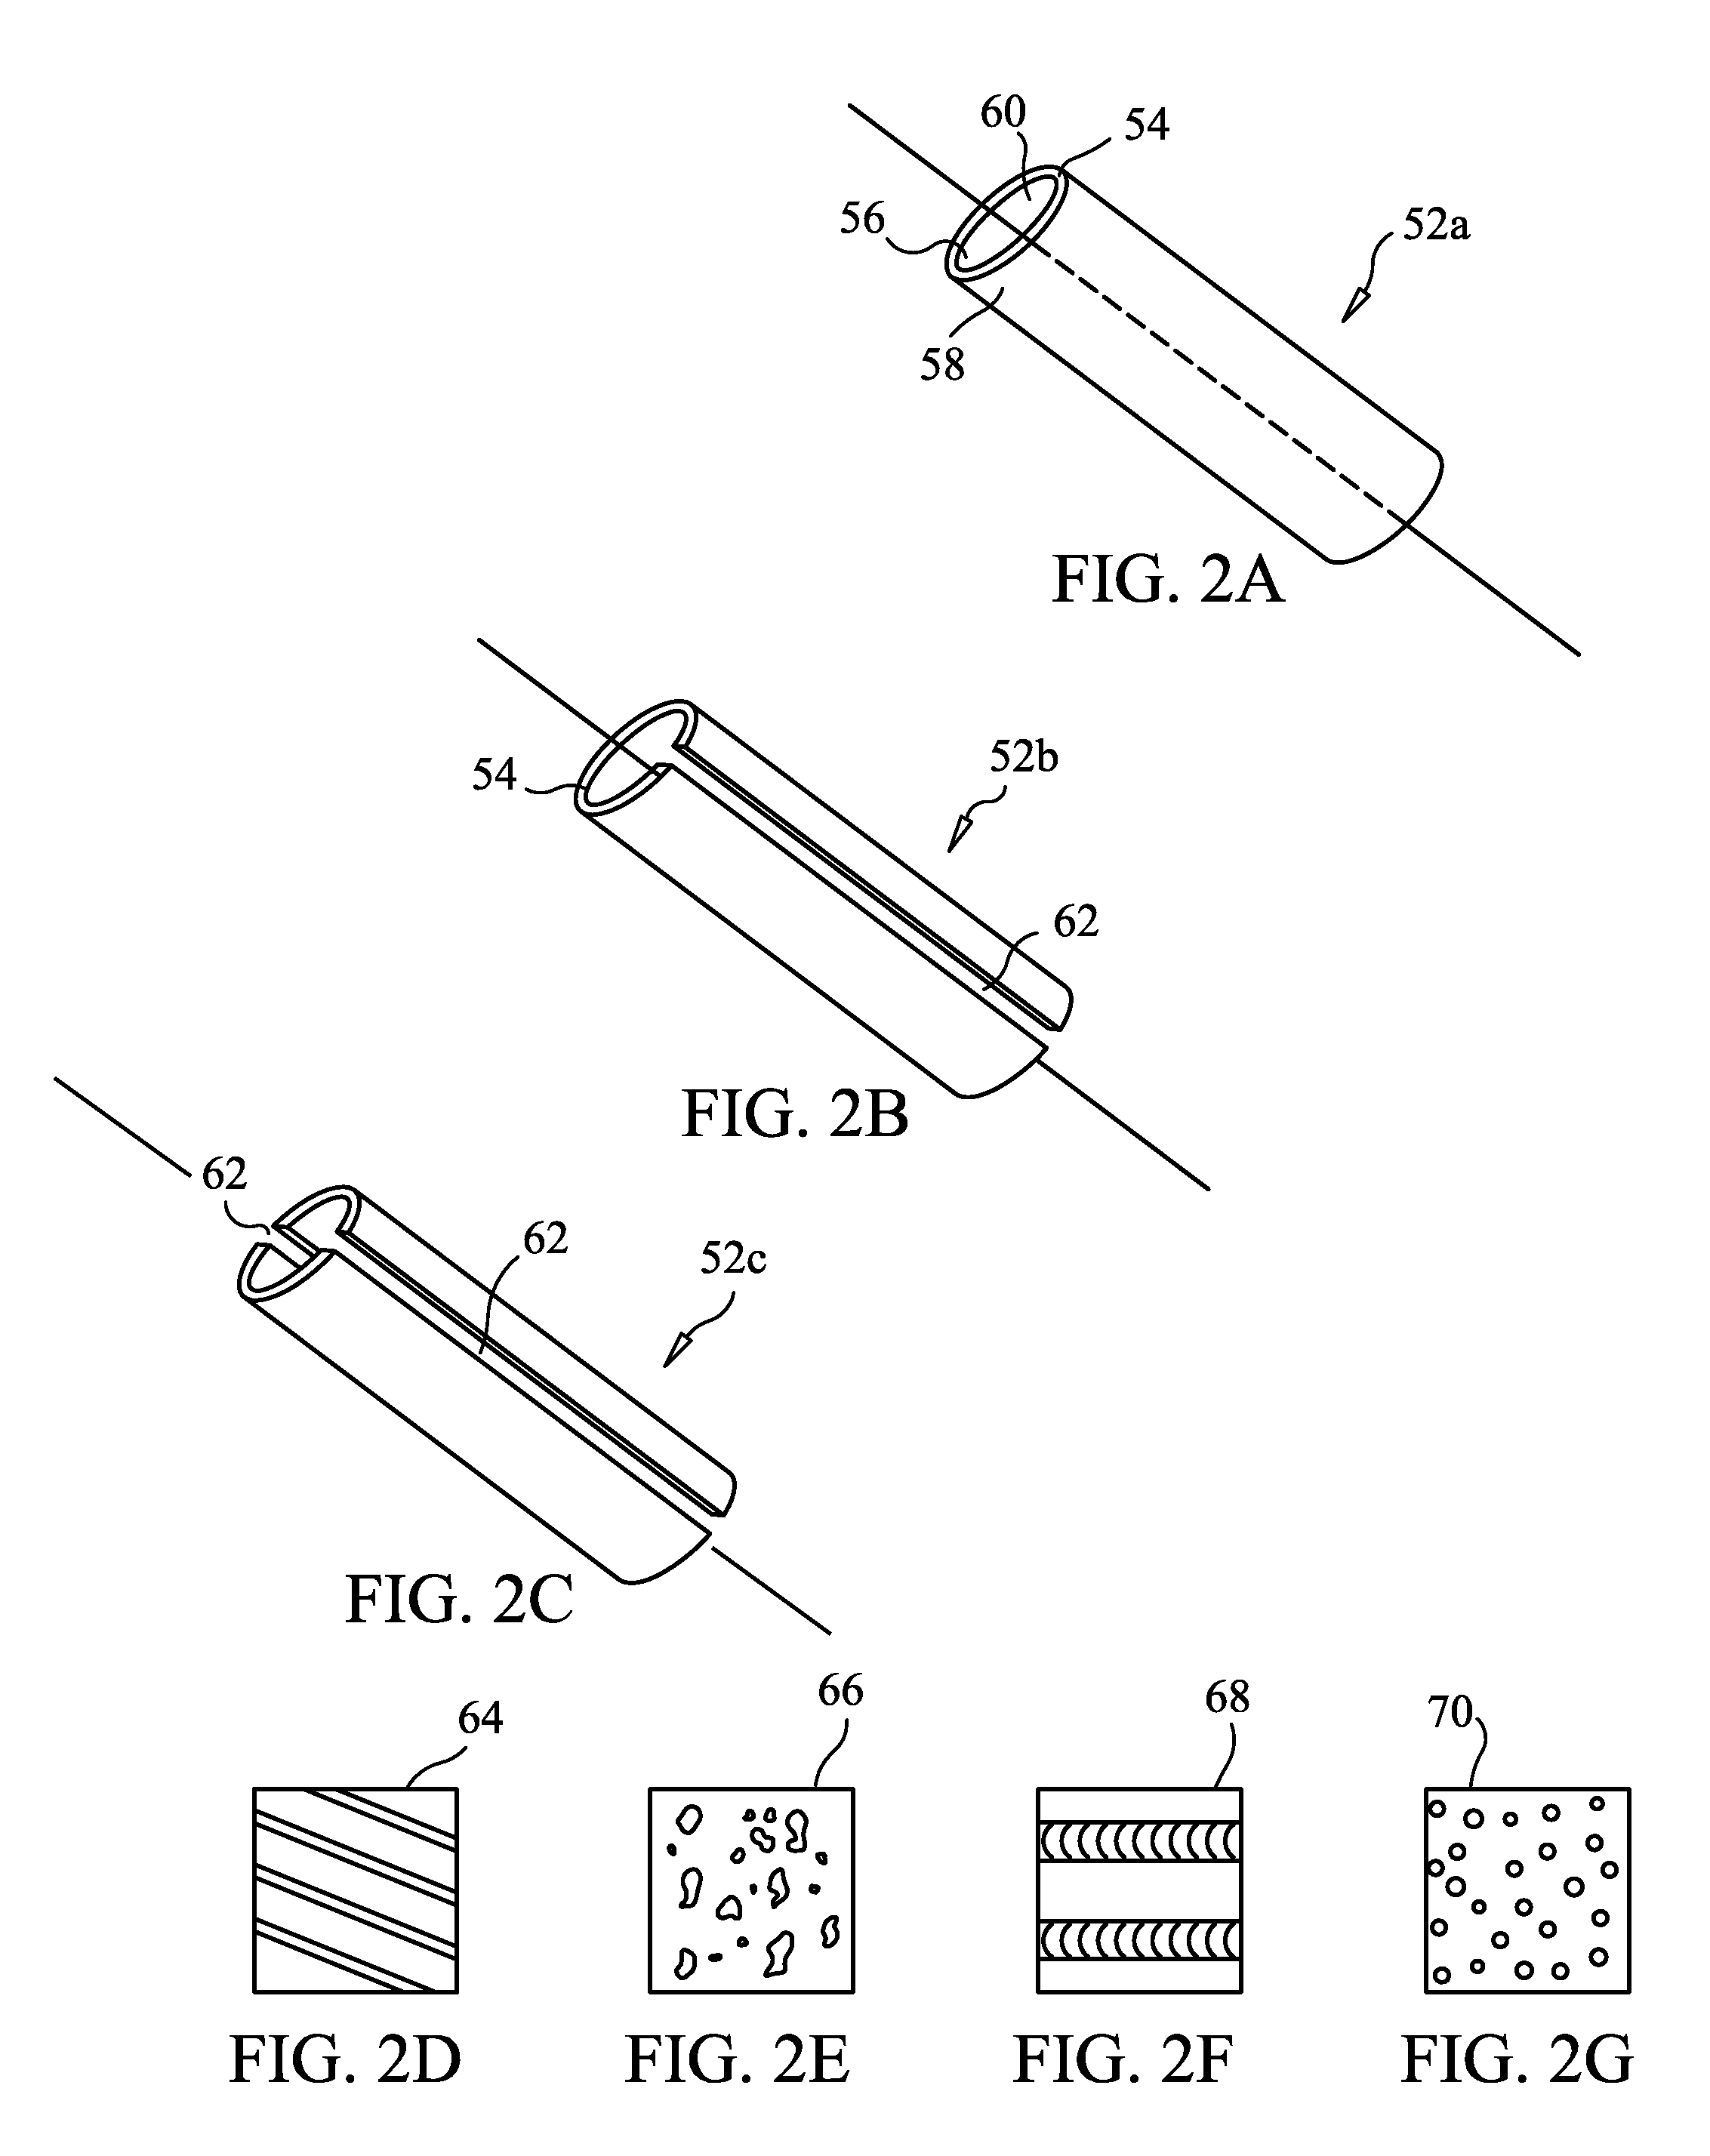 Expandable introducer system and methods